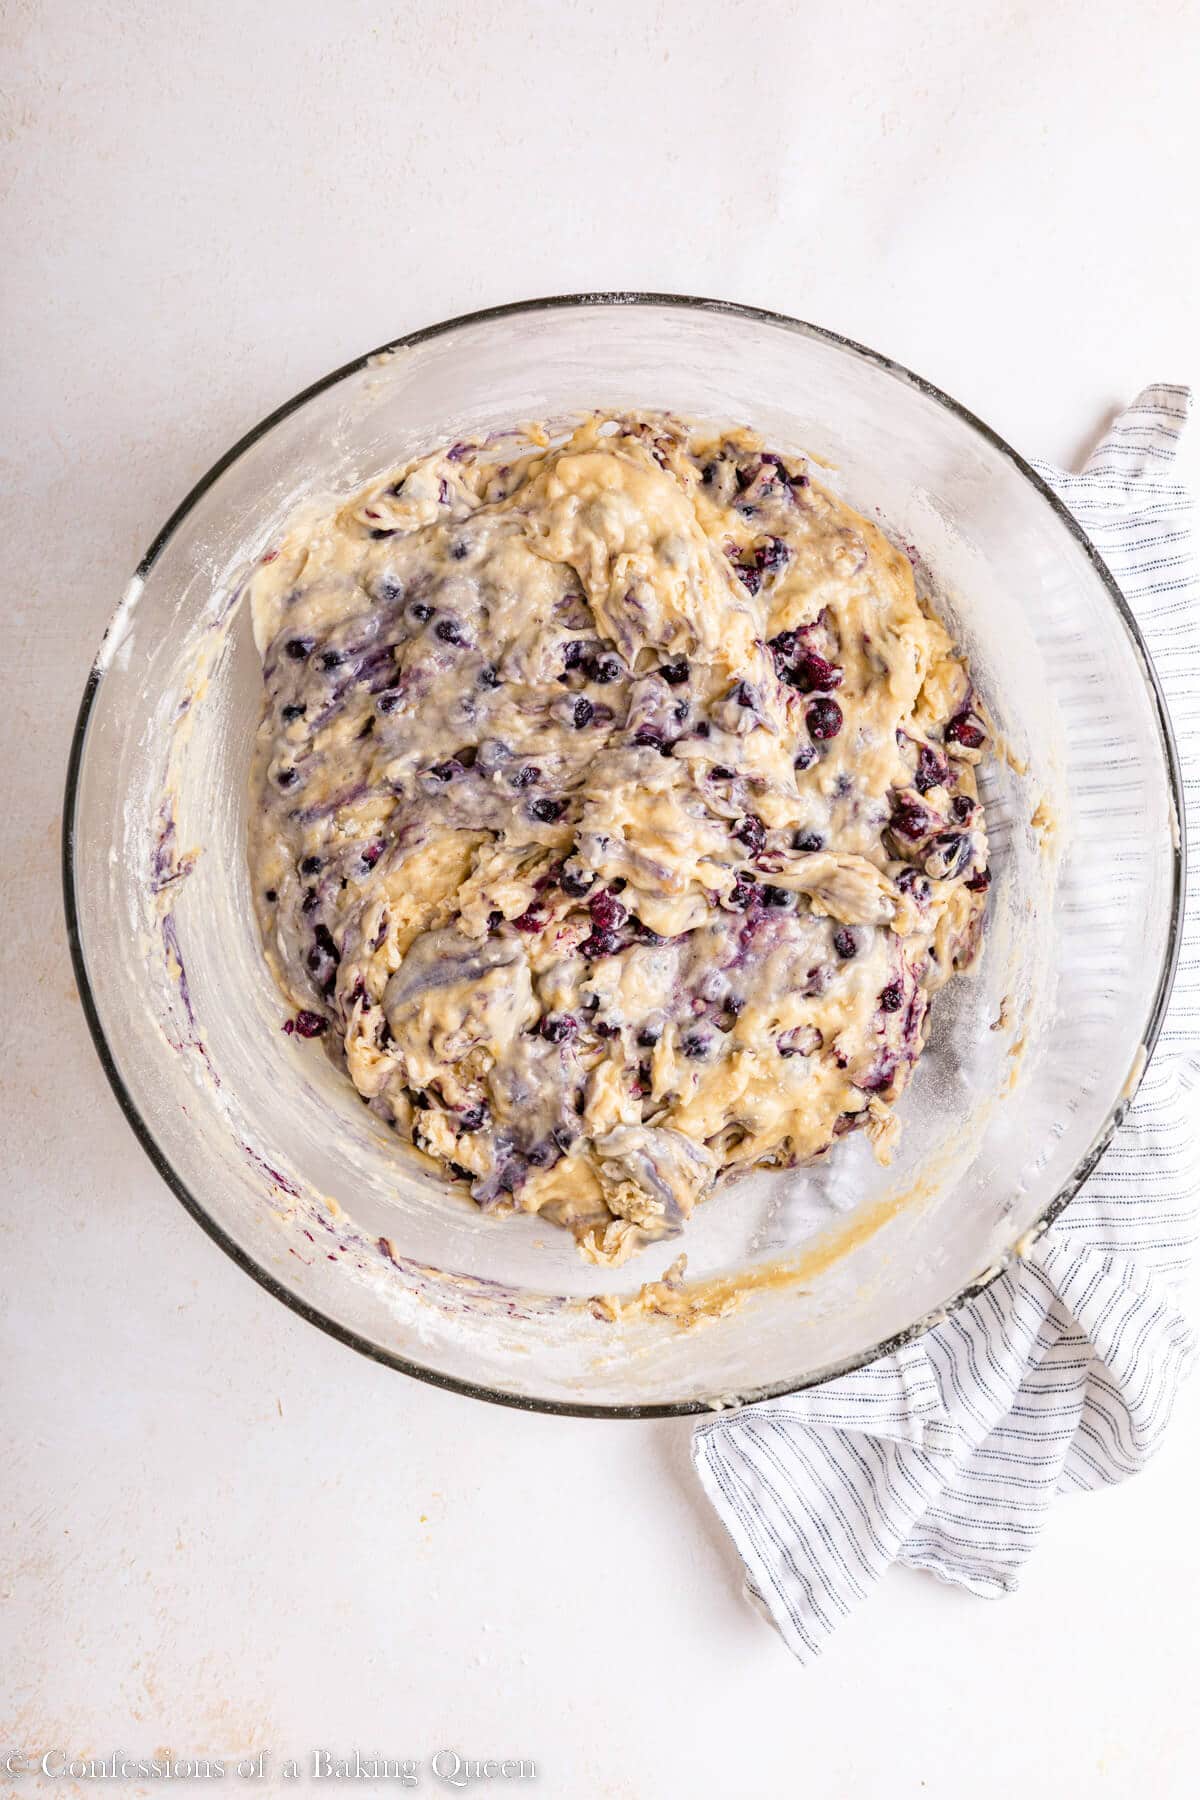 Banana blueberry muffin batter in a mixing bowl.